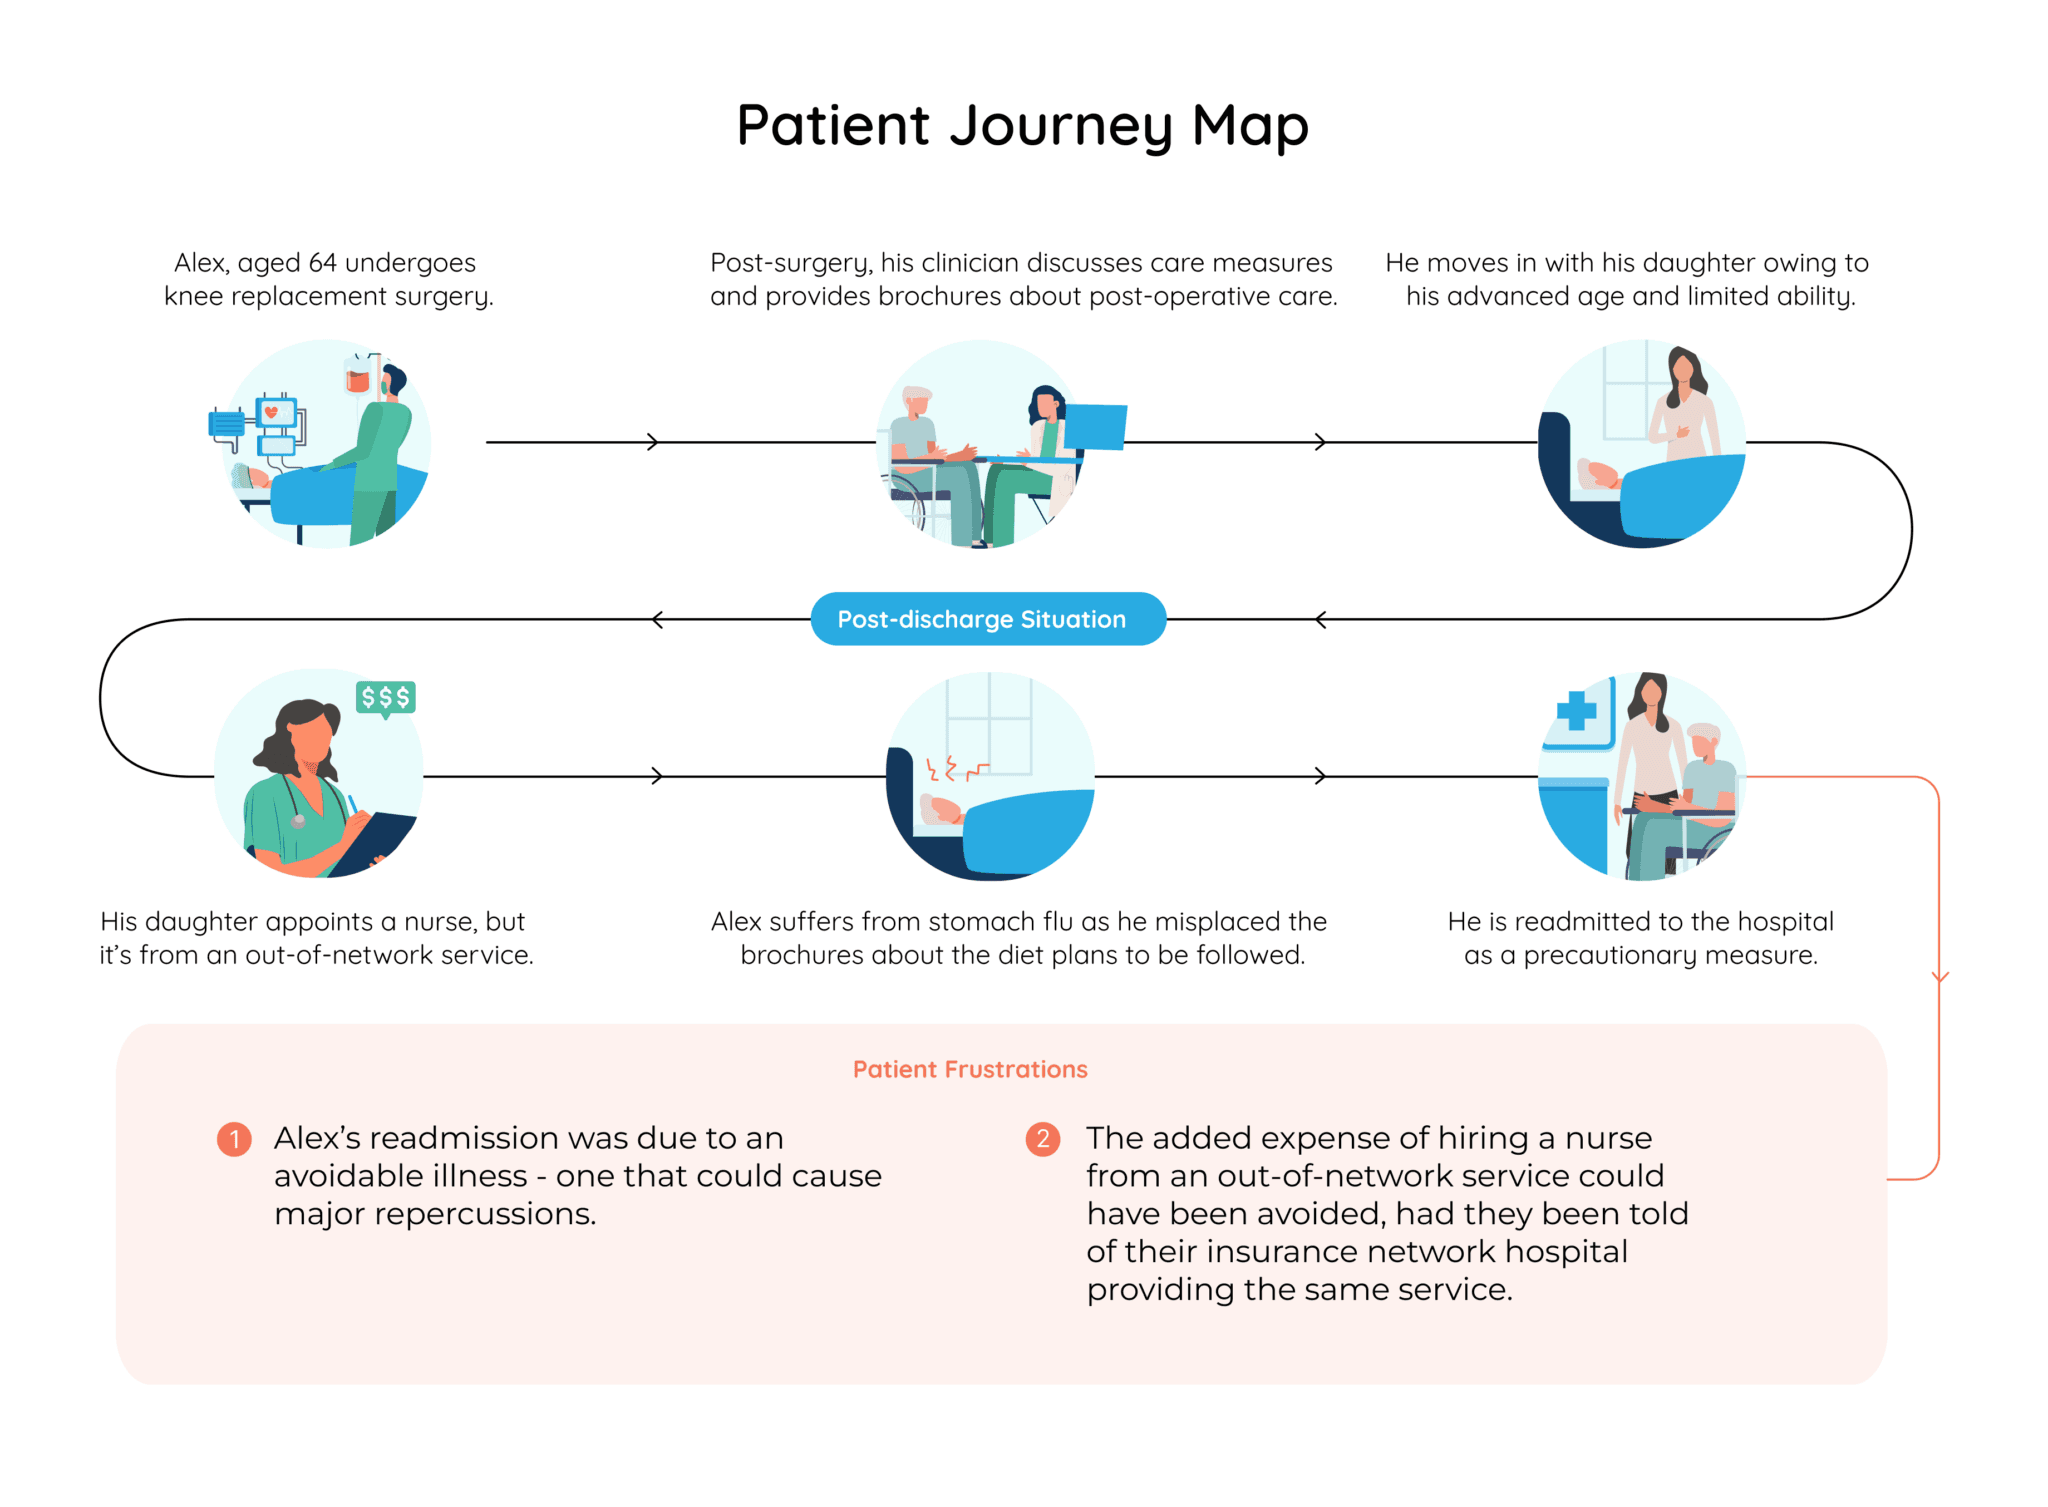 Patient journey map depicting the process from hospital admission, discharge, and readmission due to faulty post-discharge care